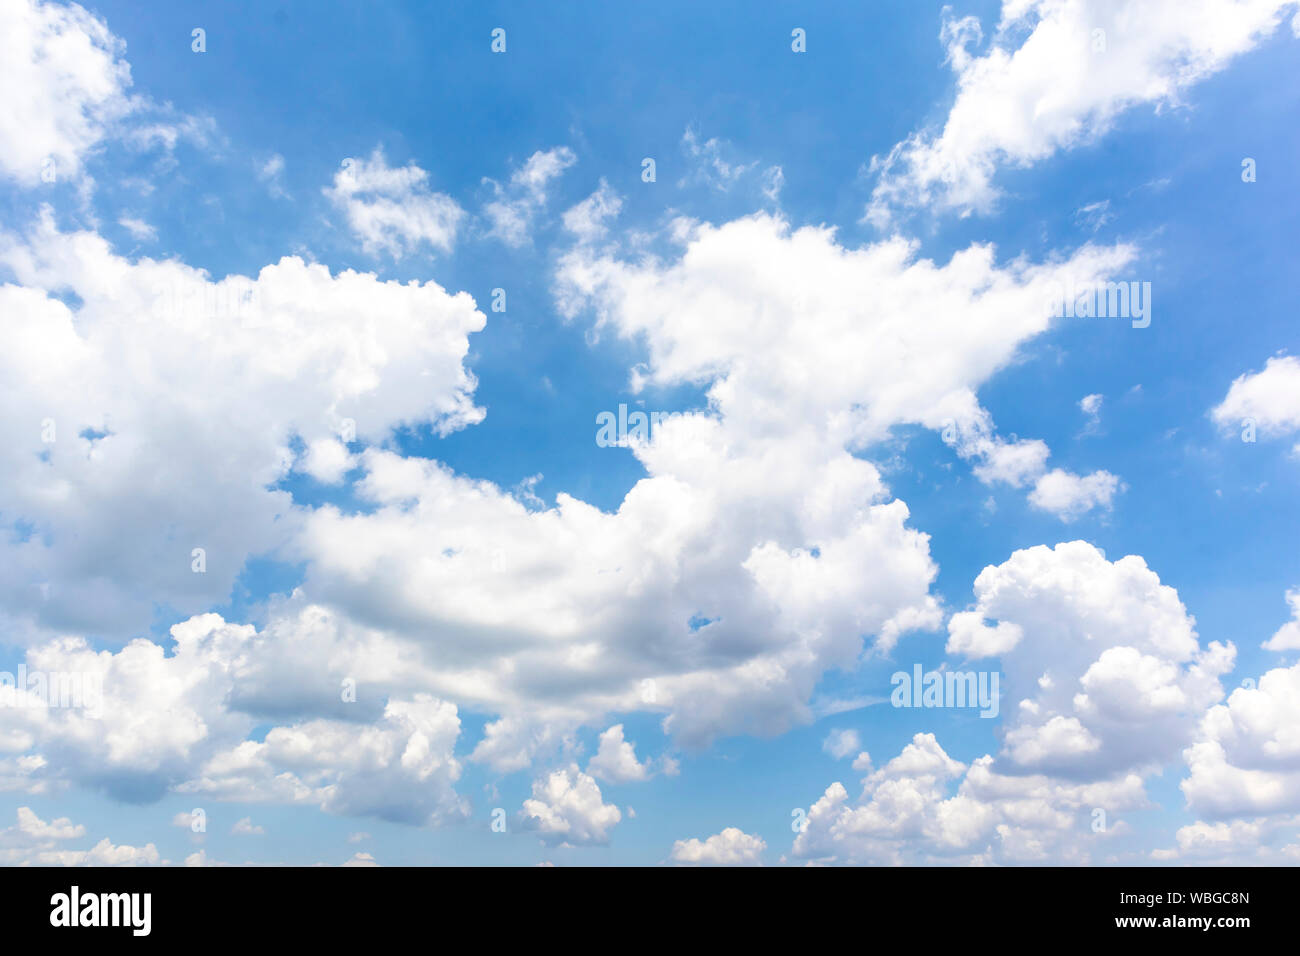 Beautiful blue sky with cloudy background and texture. Stock Photo